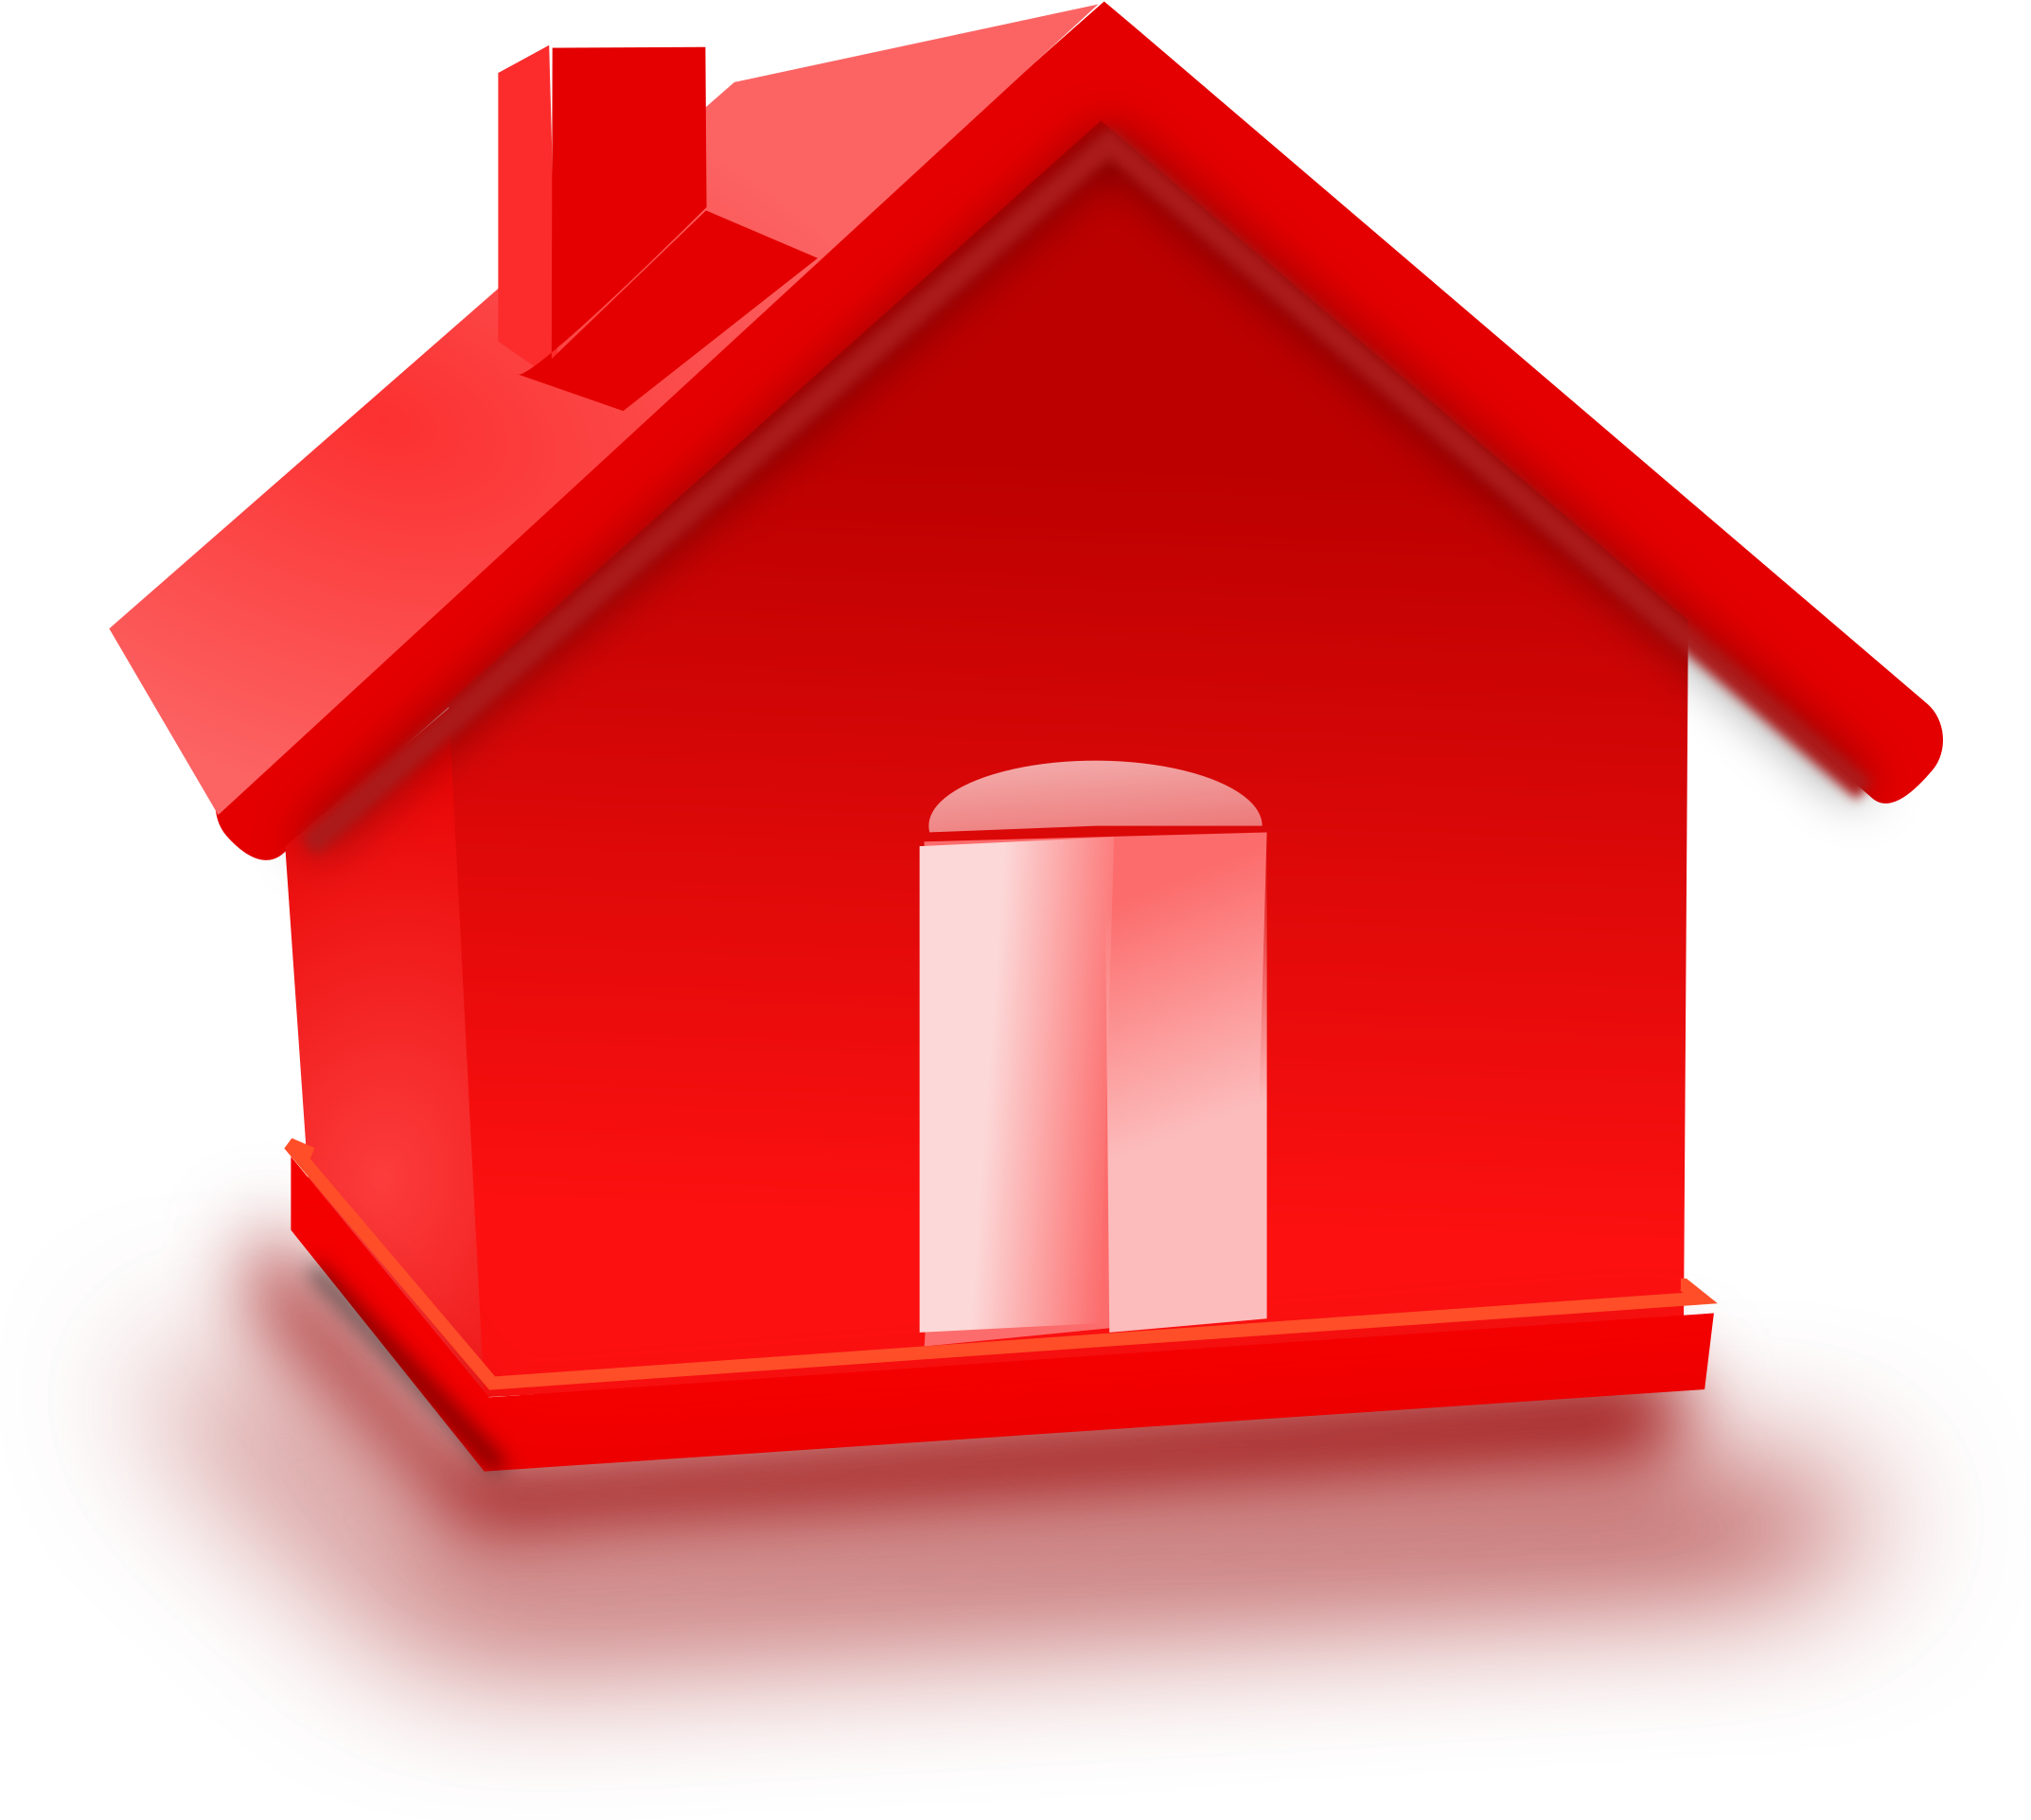 1309168682 Clipart Of A Red - Red House Clipart (2400x2400)